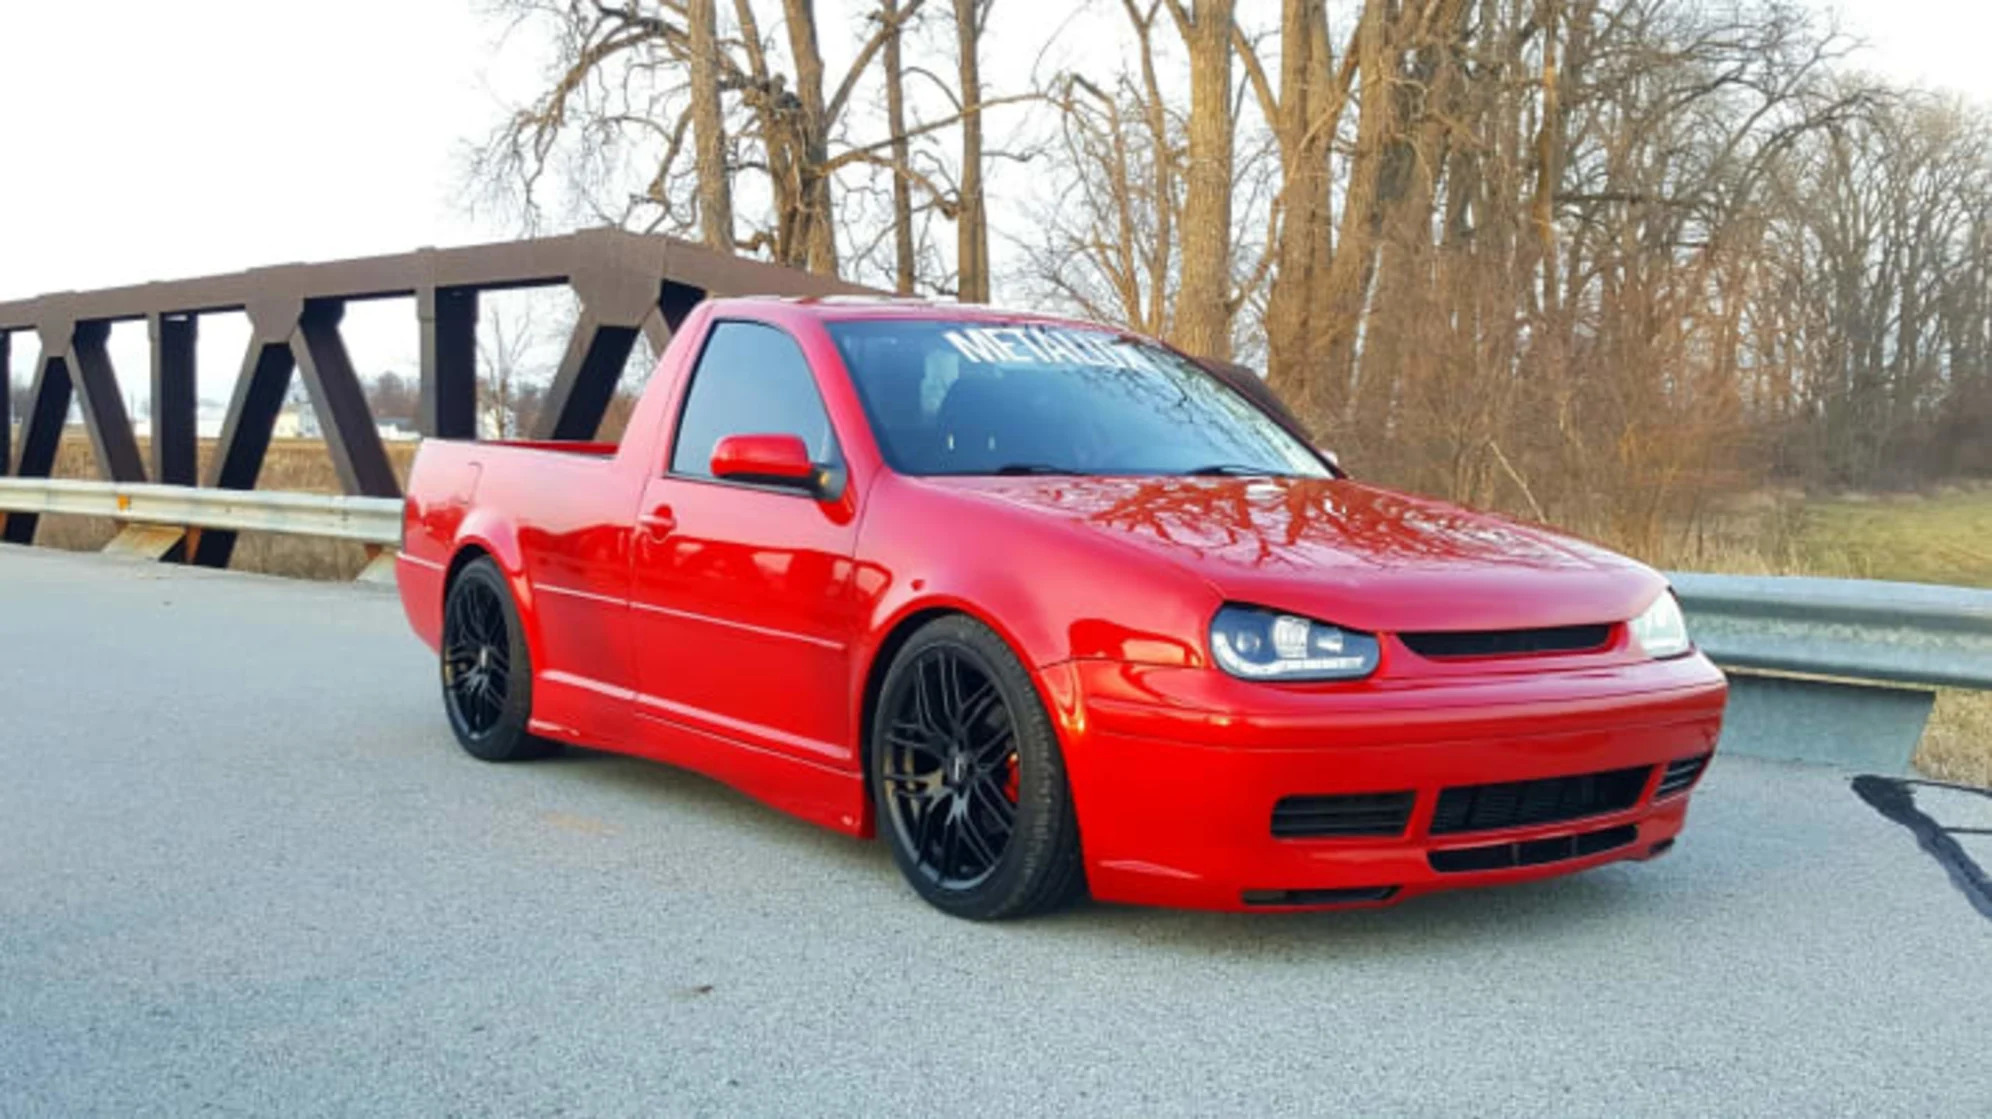 Smyth Performance Jetta Ute conversion by Tim Cleland and Kyle Lascano